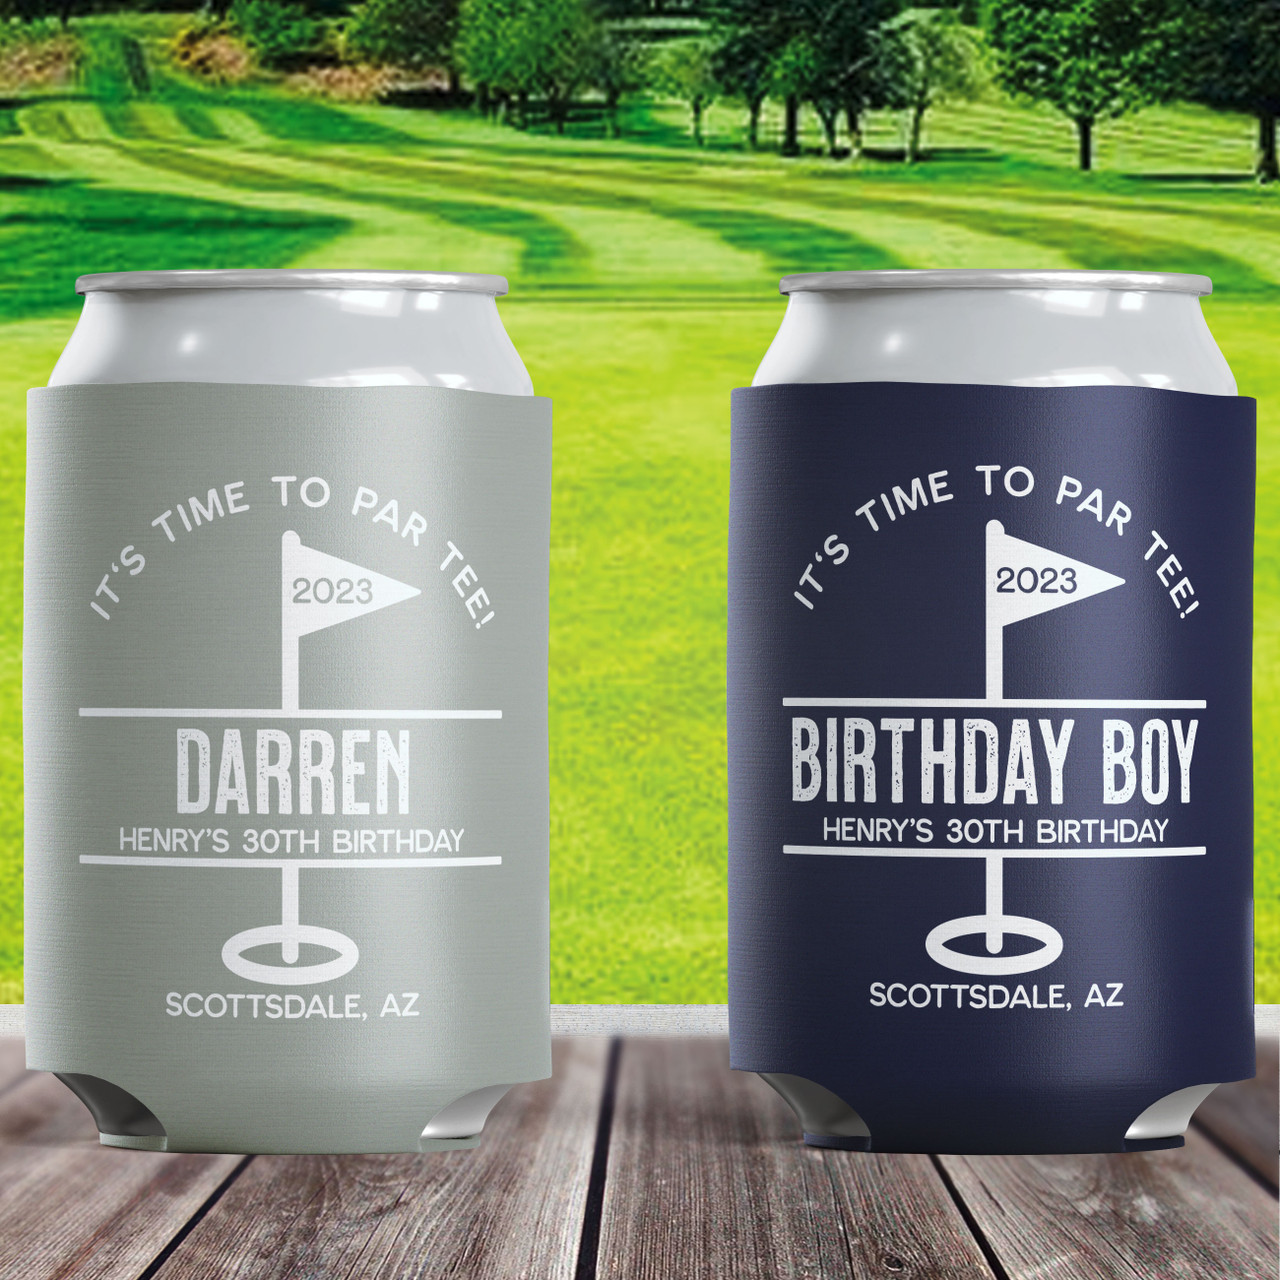 https://cdn11.bigcommerce.com/s-5grzuu6/images/stencil/1280x1280/products/6054/53427/Golf-Birthday-Party-Custom-Can-Coolers-with_Names__98920.1681854849.jpg?c=2